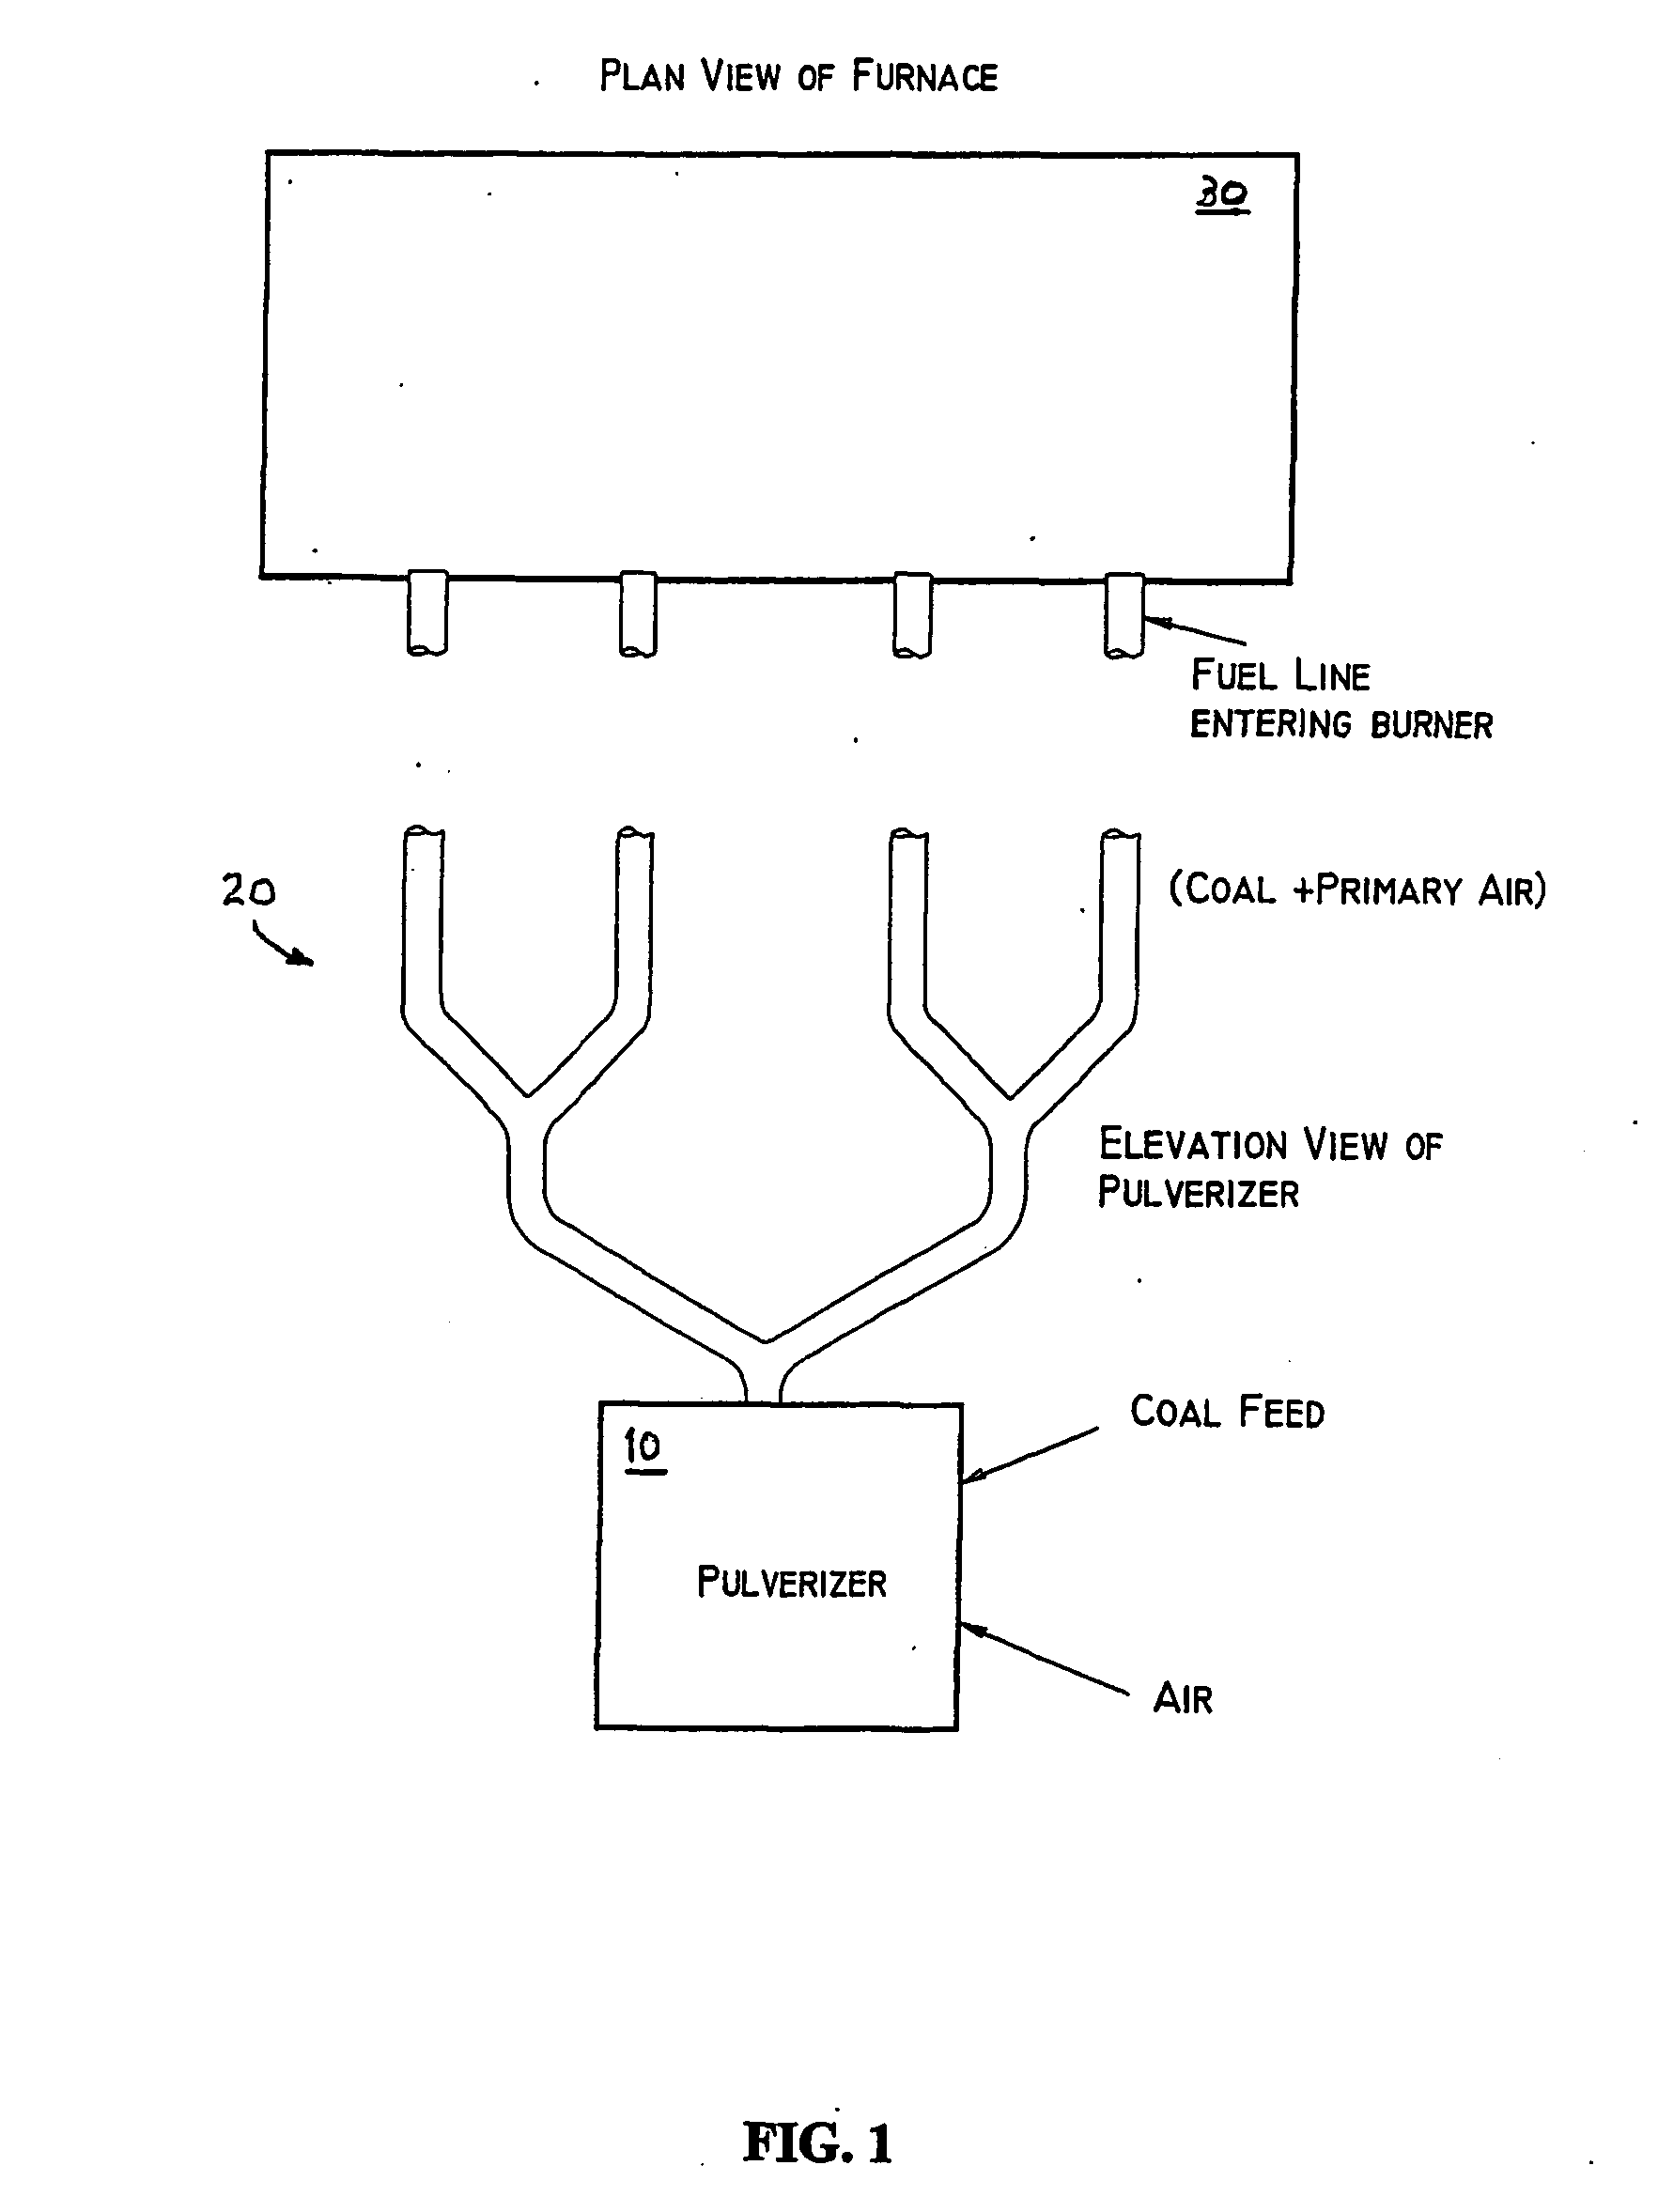 Adjustable air foils for balancing pulverized coal flow at a coal pipe splitter junction